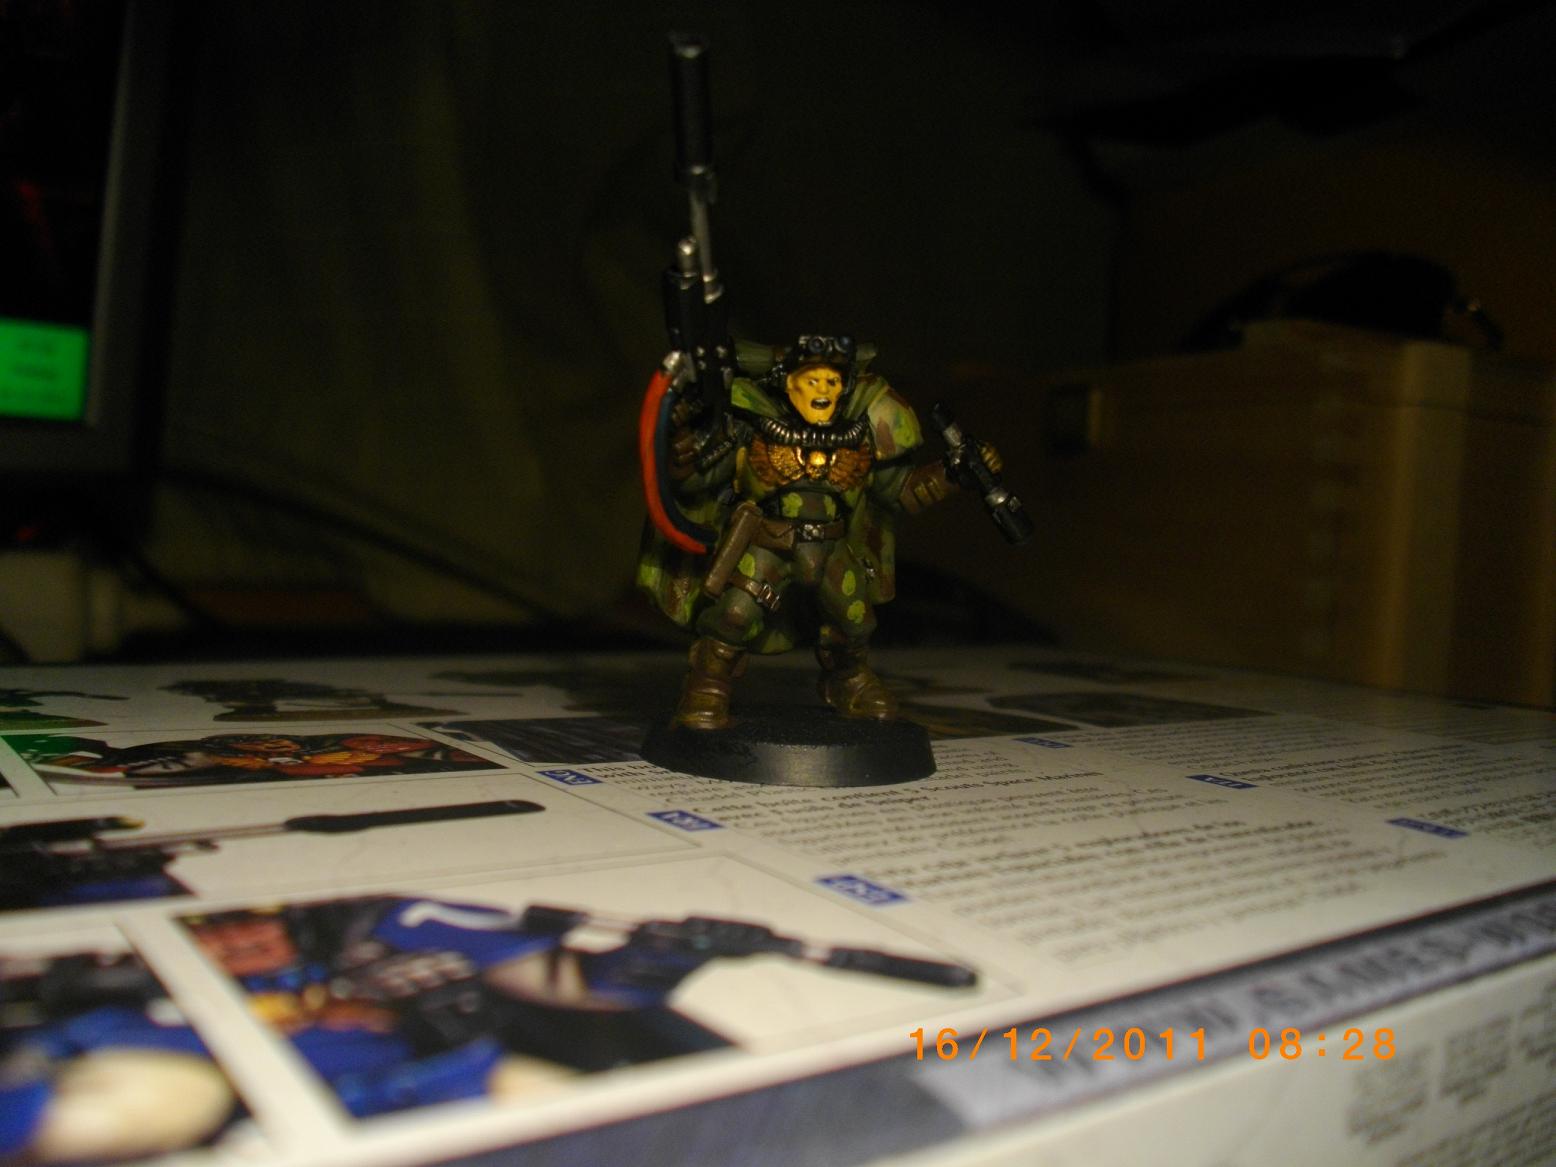 Space Marine Scout